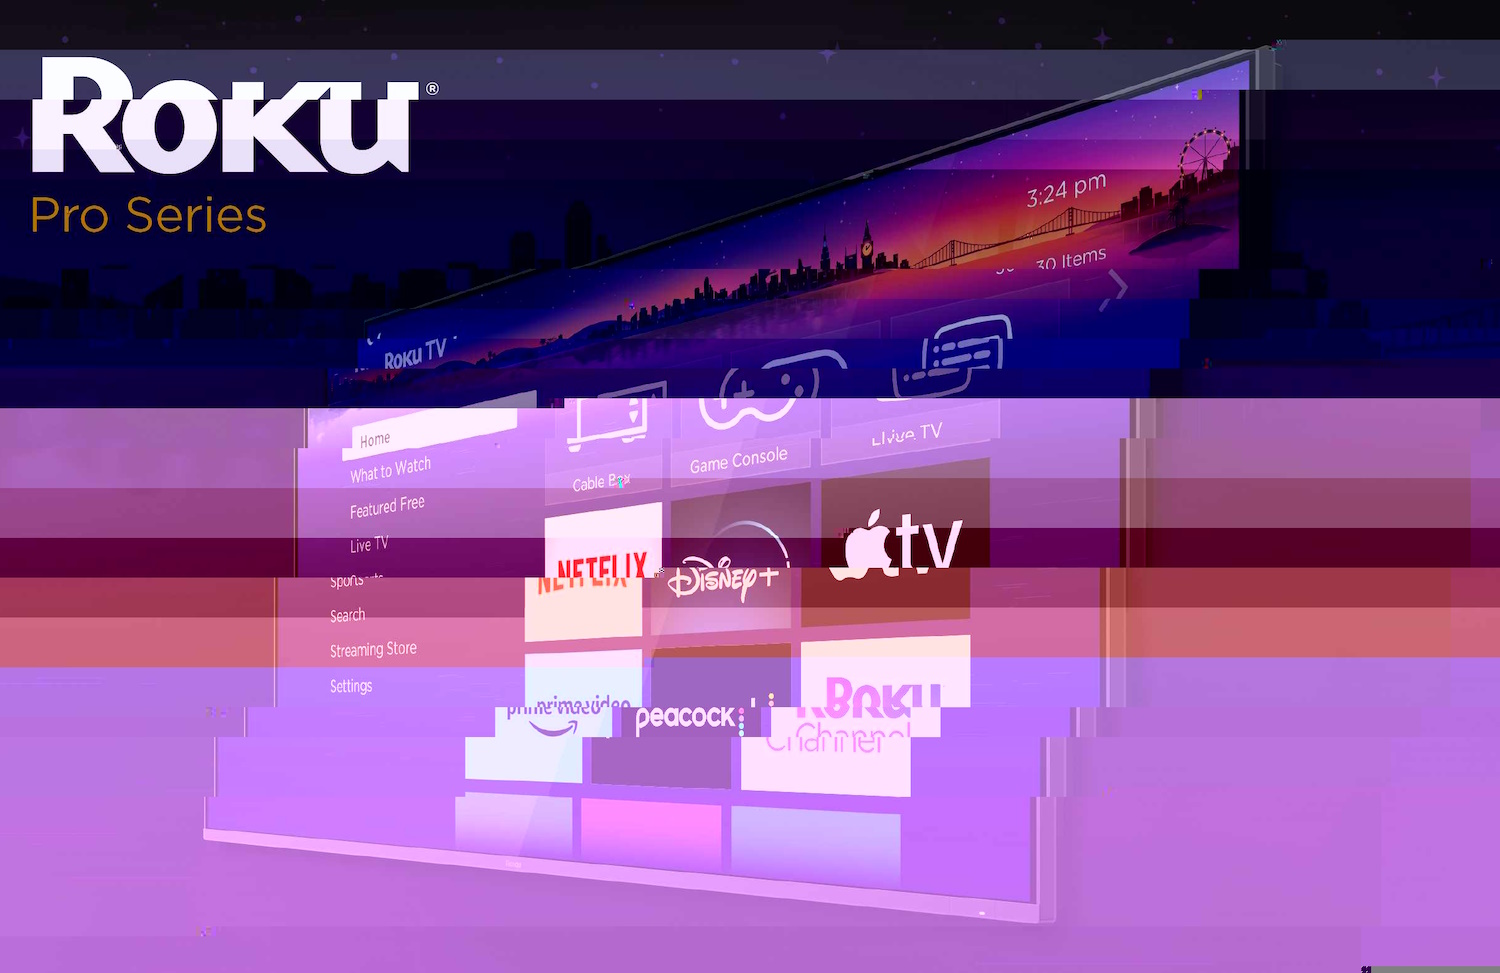 Roku disables TVs and streaming devices until users consent to new terms